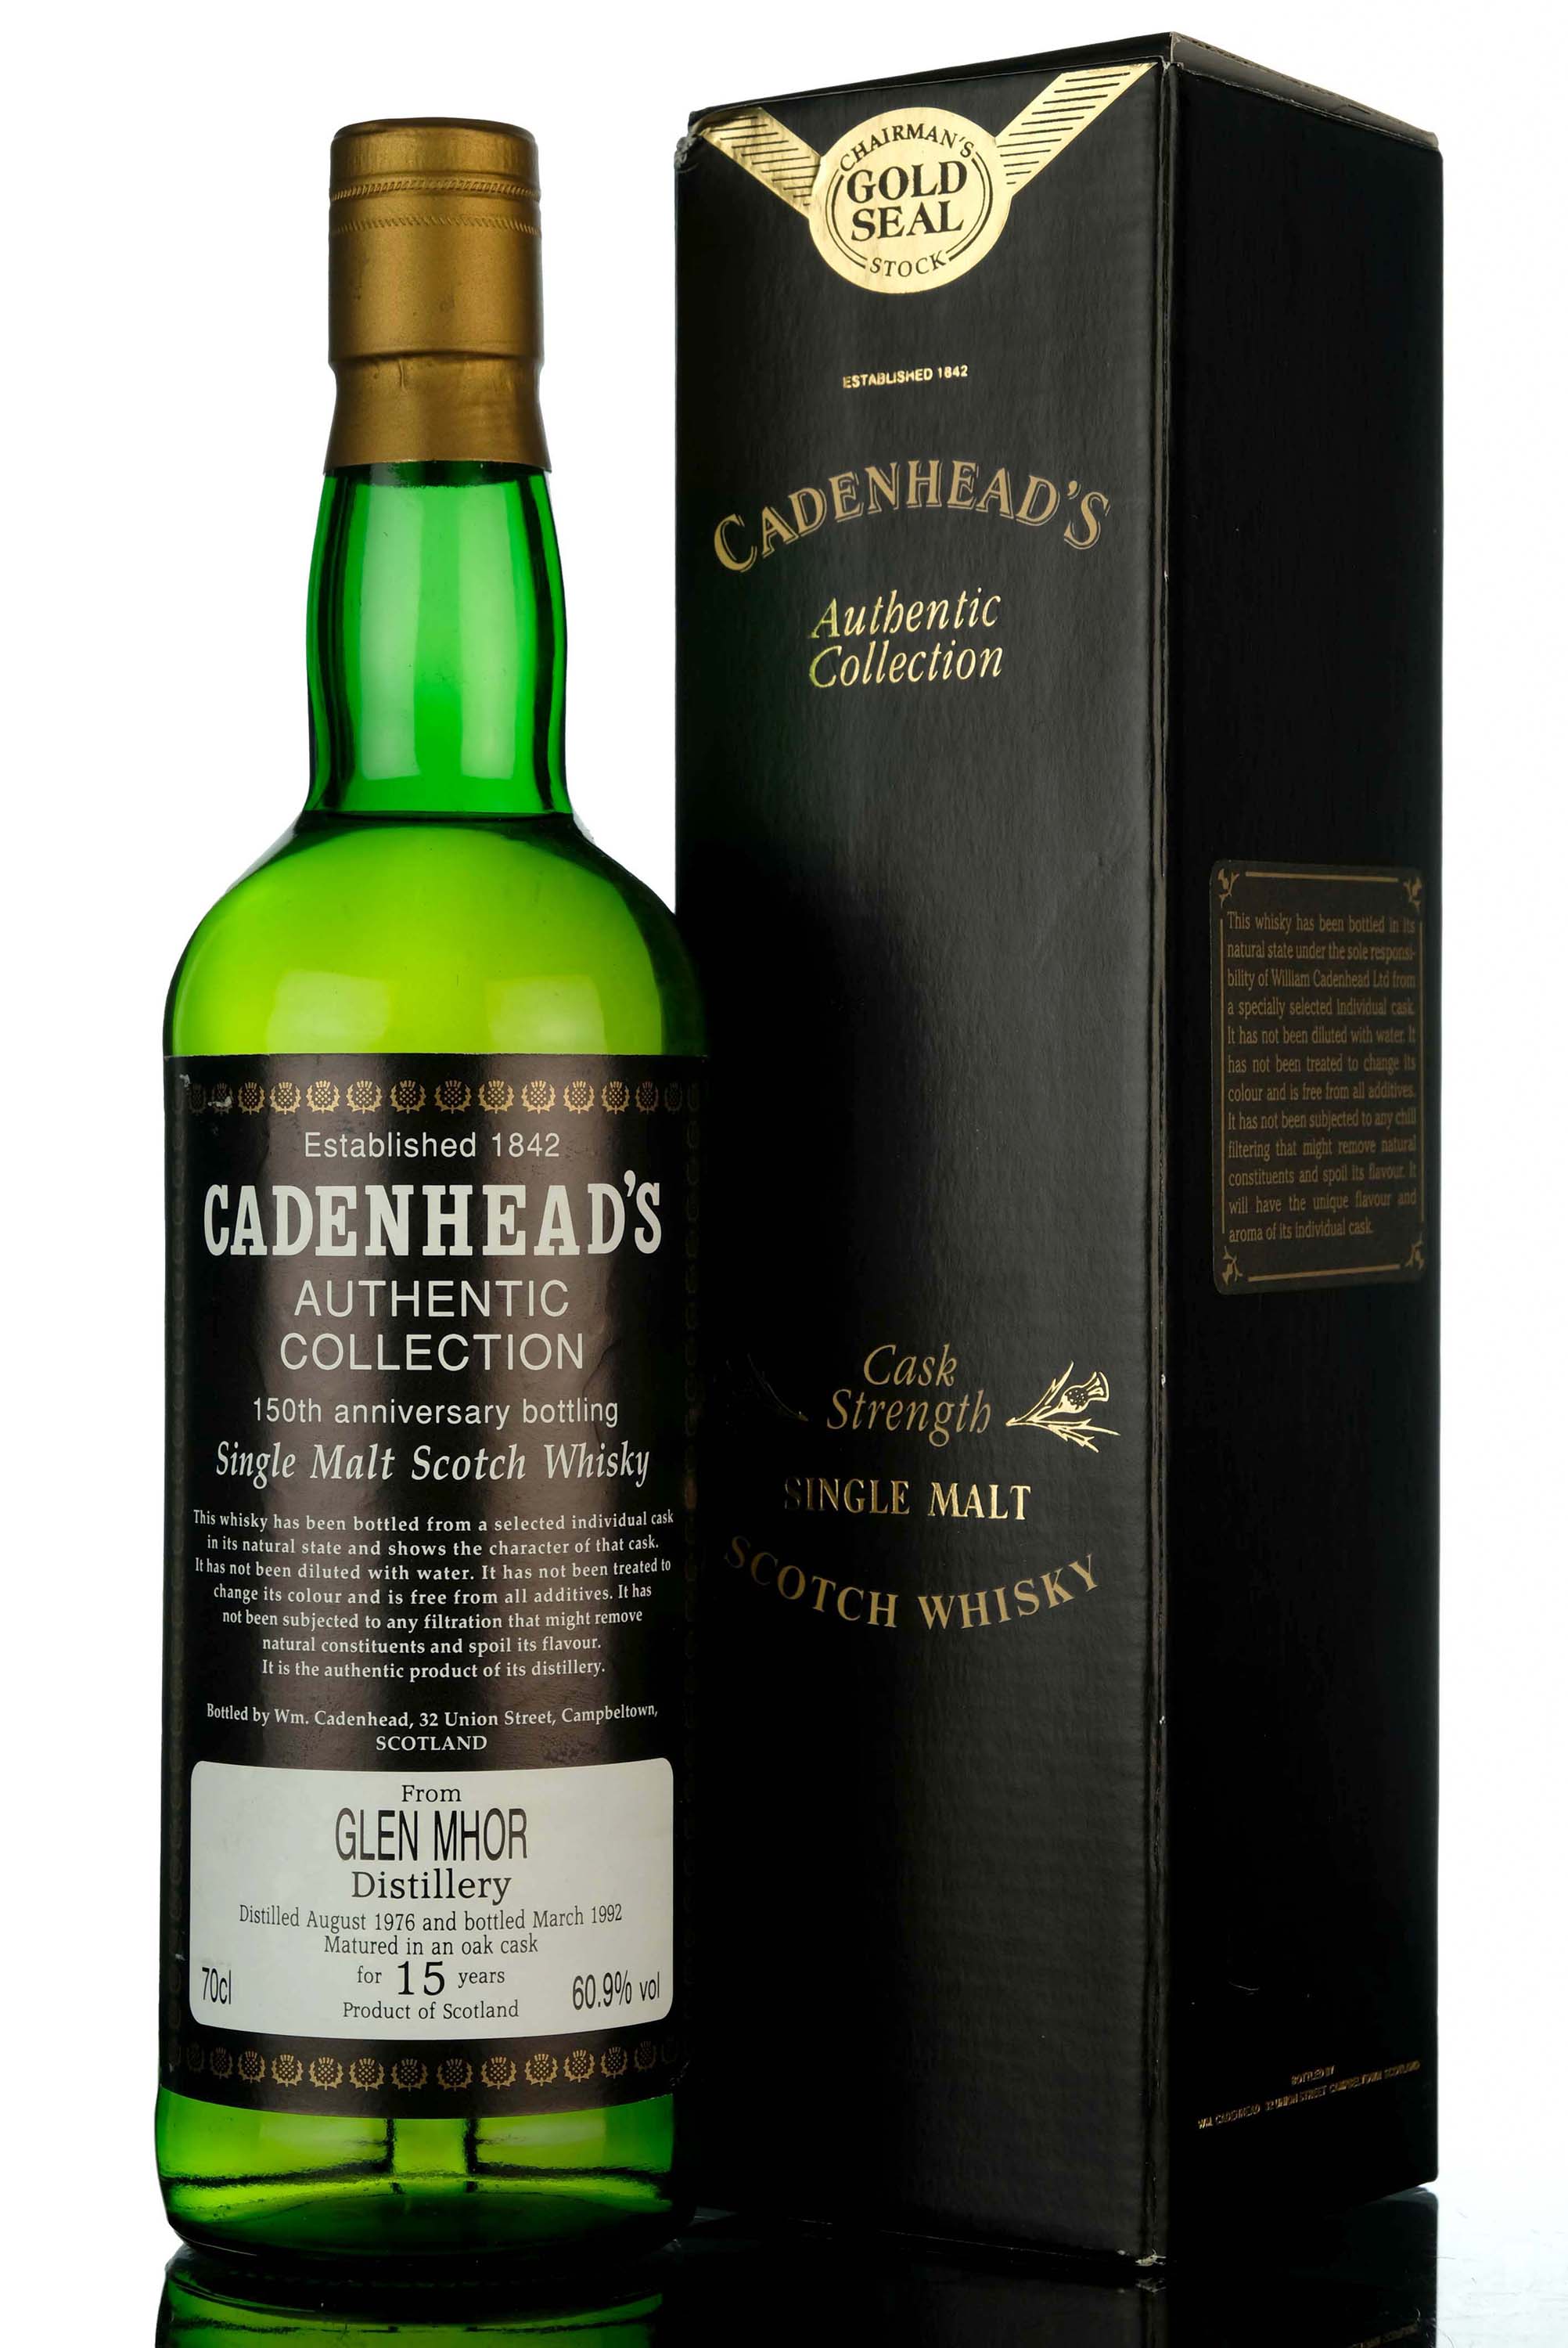 Glen Mhor 1976-1992 - 15 Year Old - Cadenheads Authentic Collection - 150th Anniversary - 